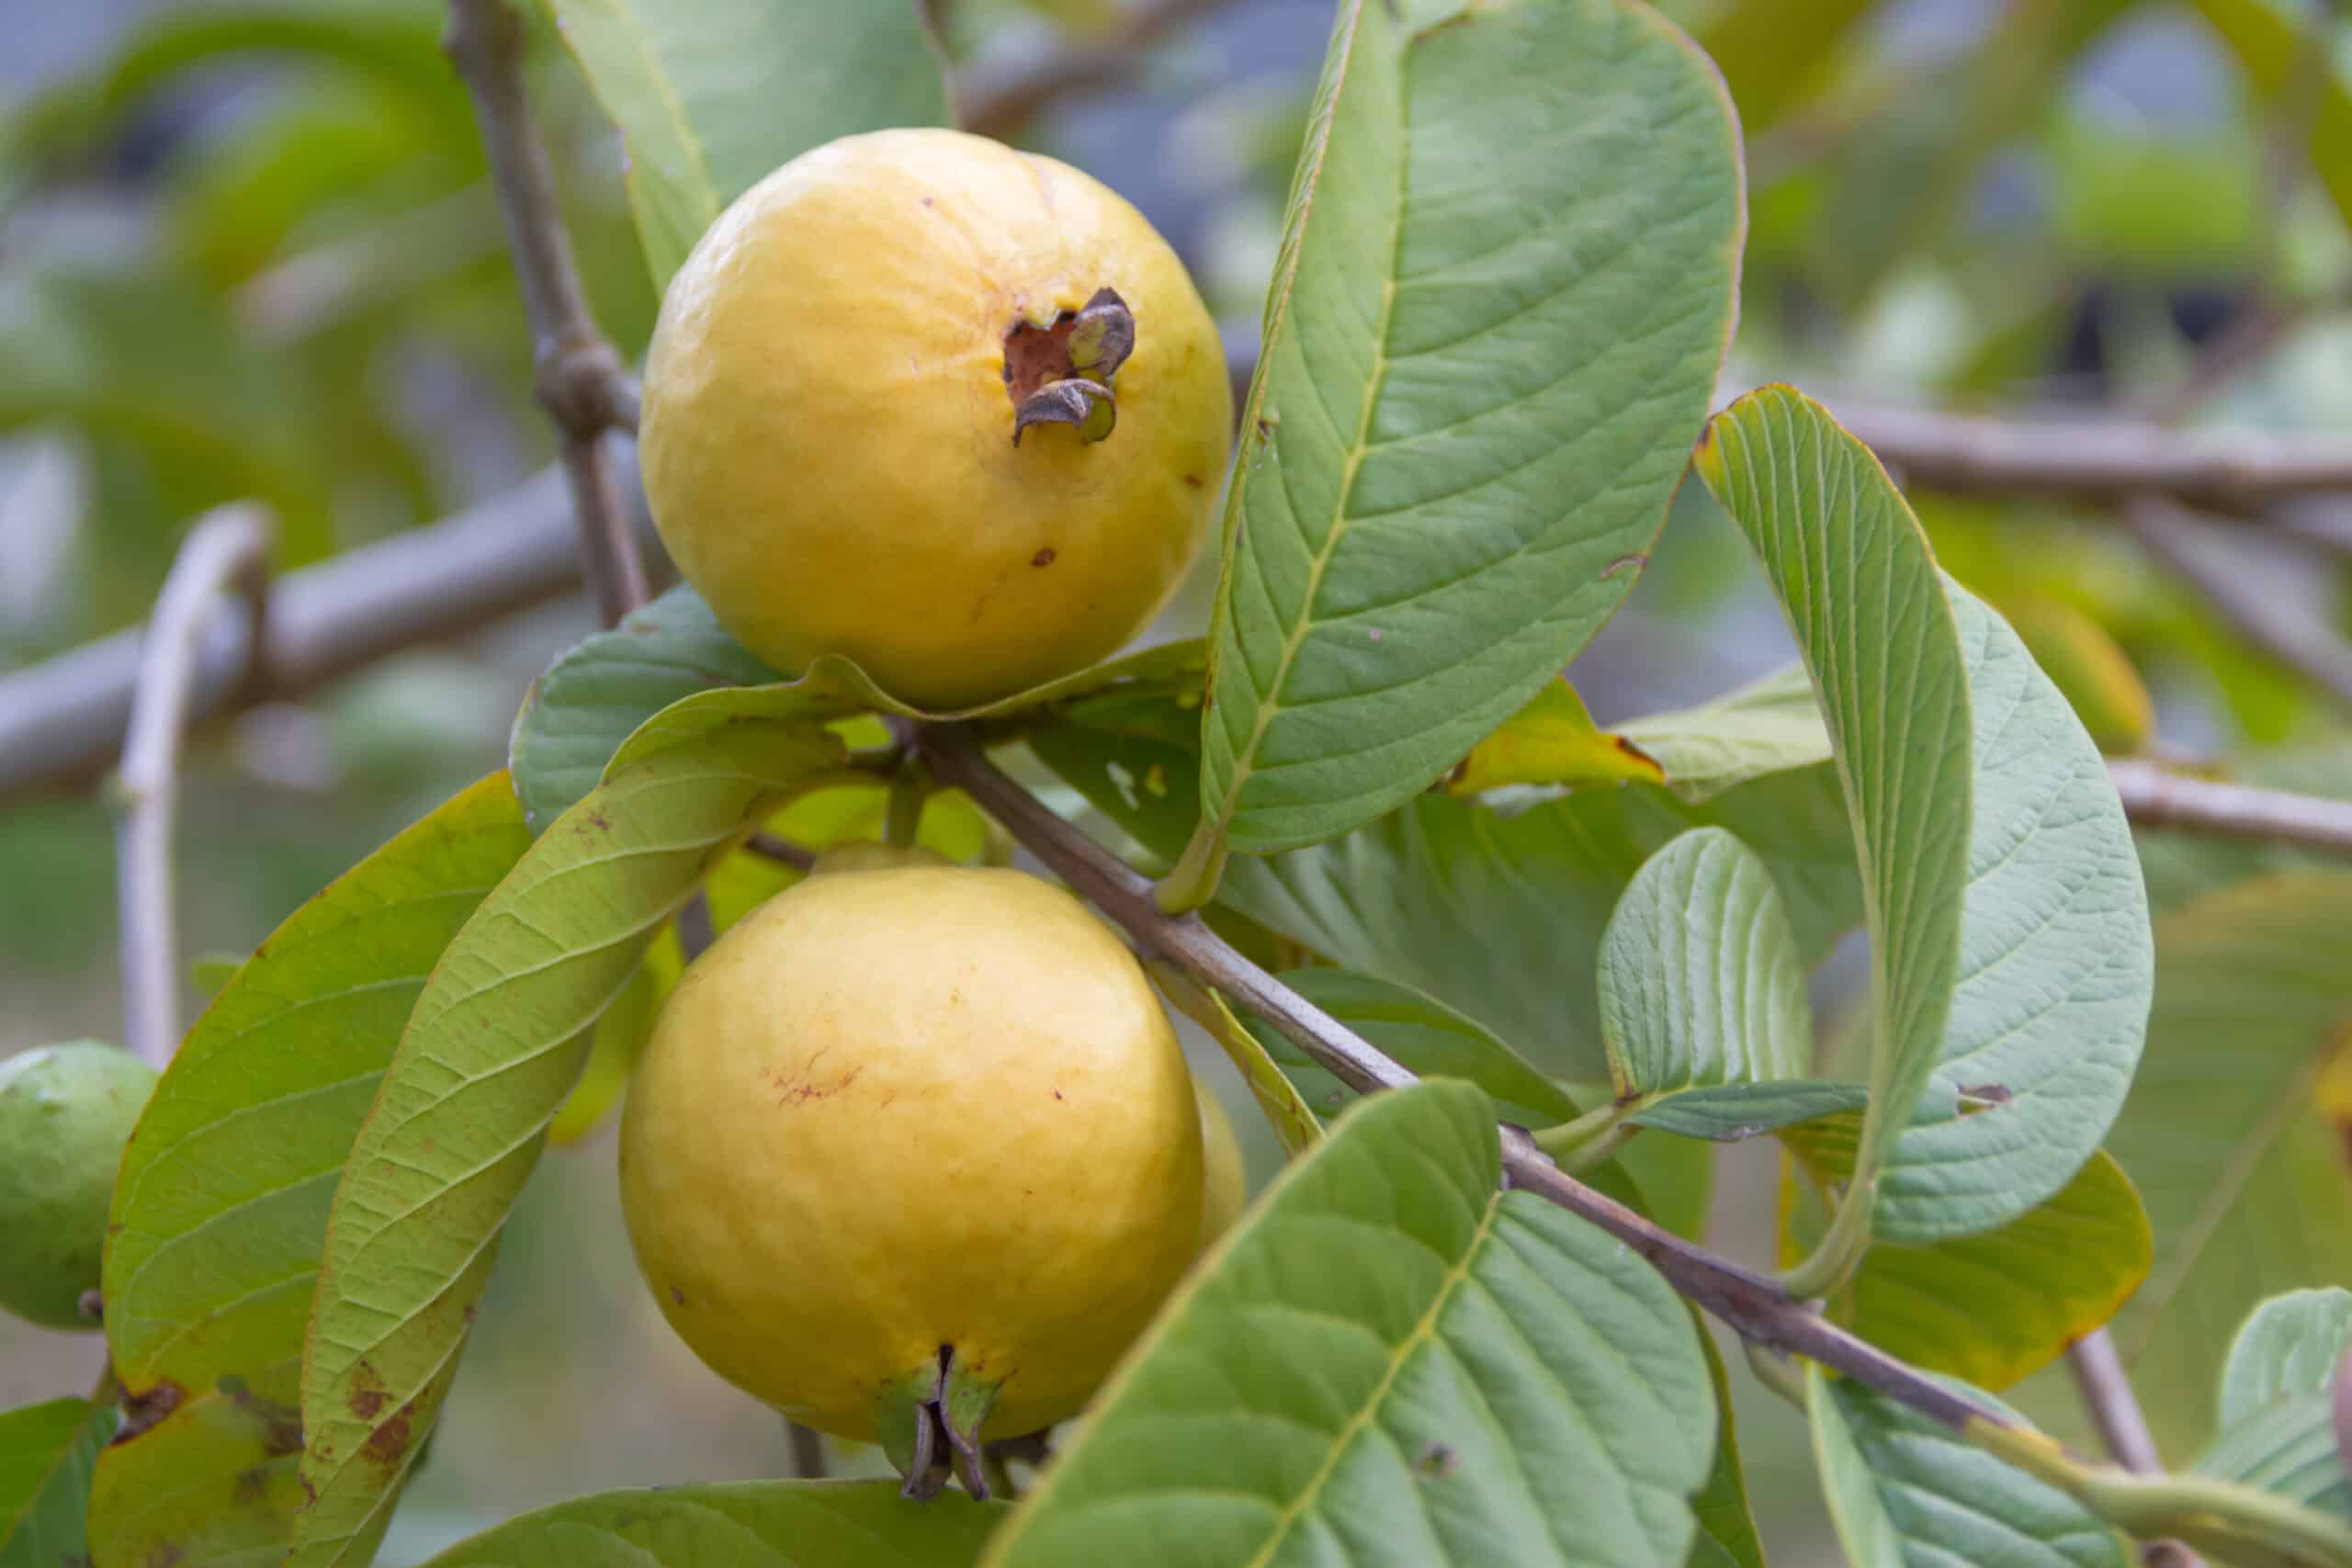 Fruits you can farm and grow in a greenhouse: Guava